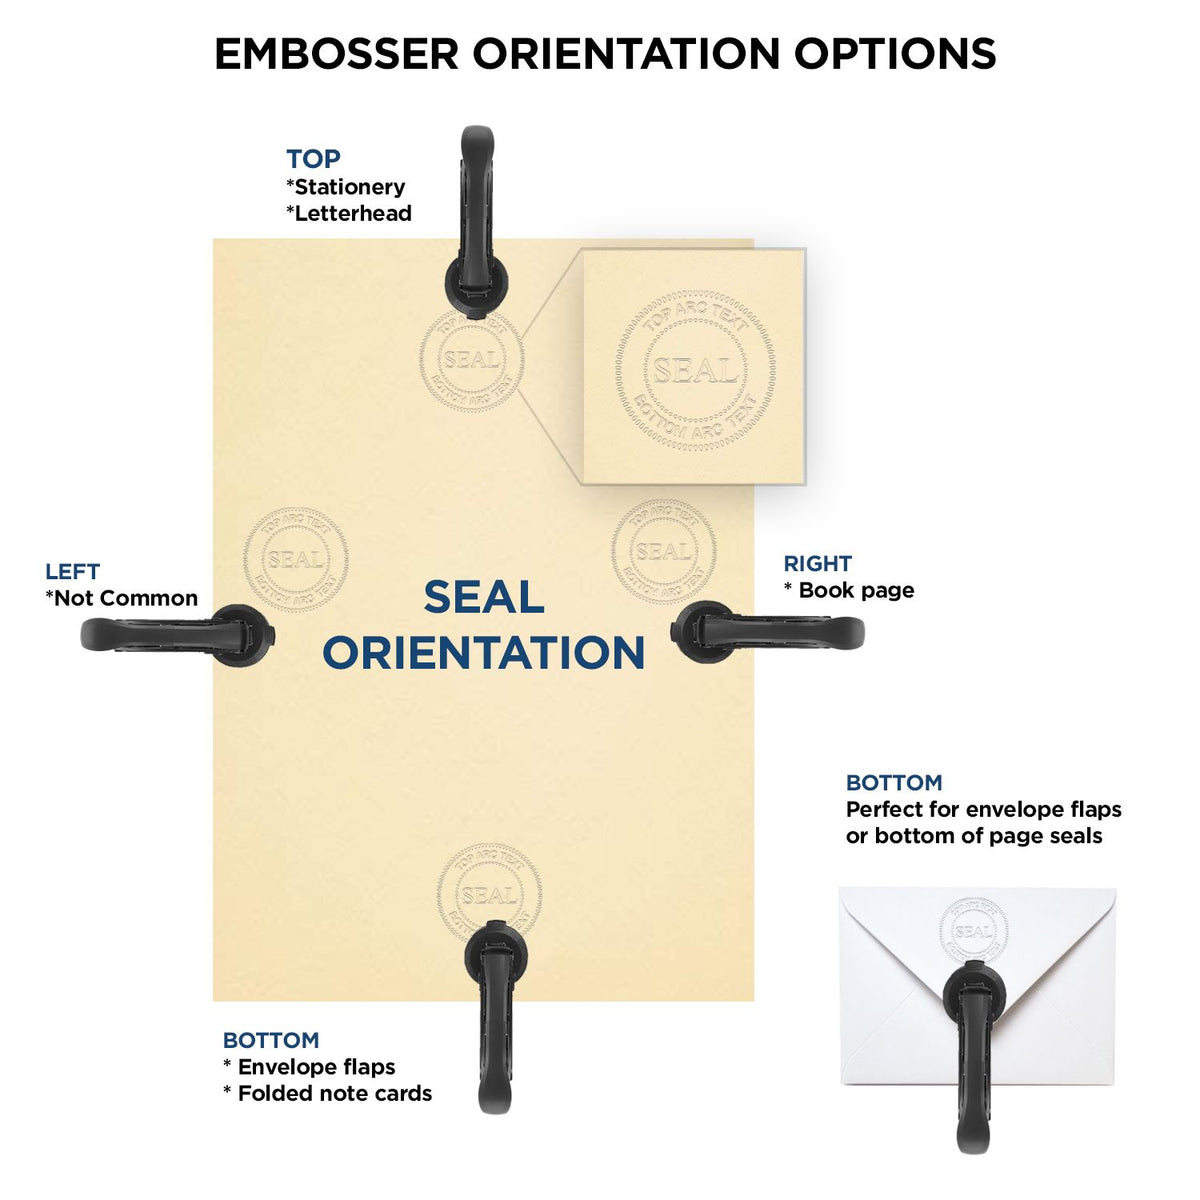 An infographic for the Soft Pocket Arkansas Landscape Architect Embosser showing embosser orientation, this is showing examples of a top, bottom, right and left insert.